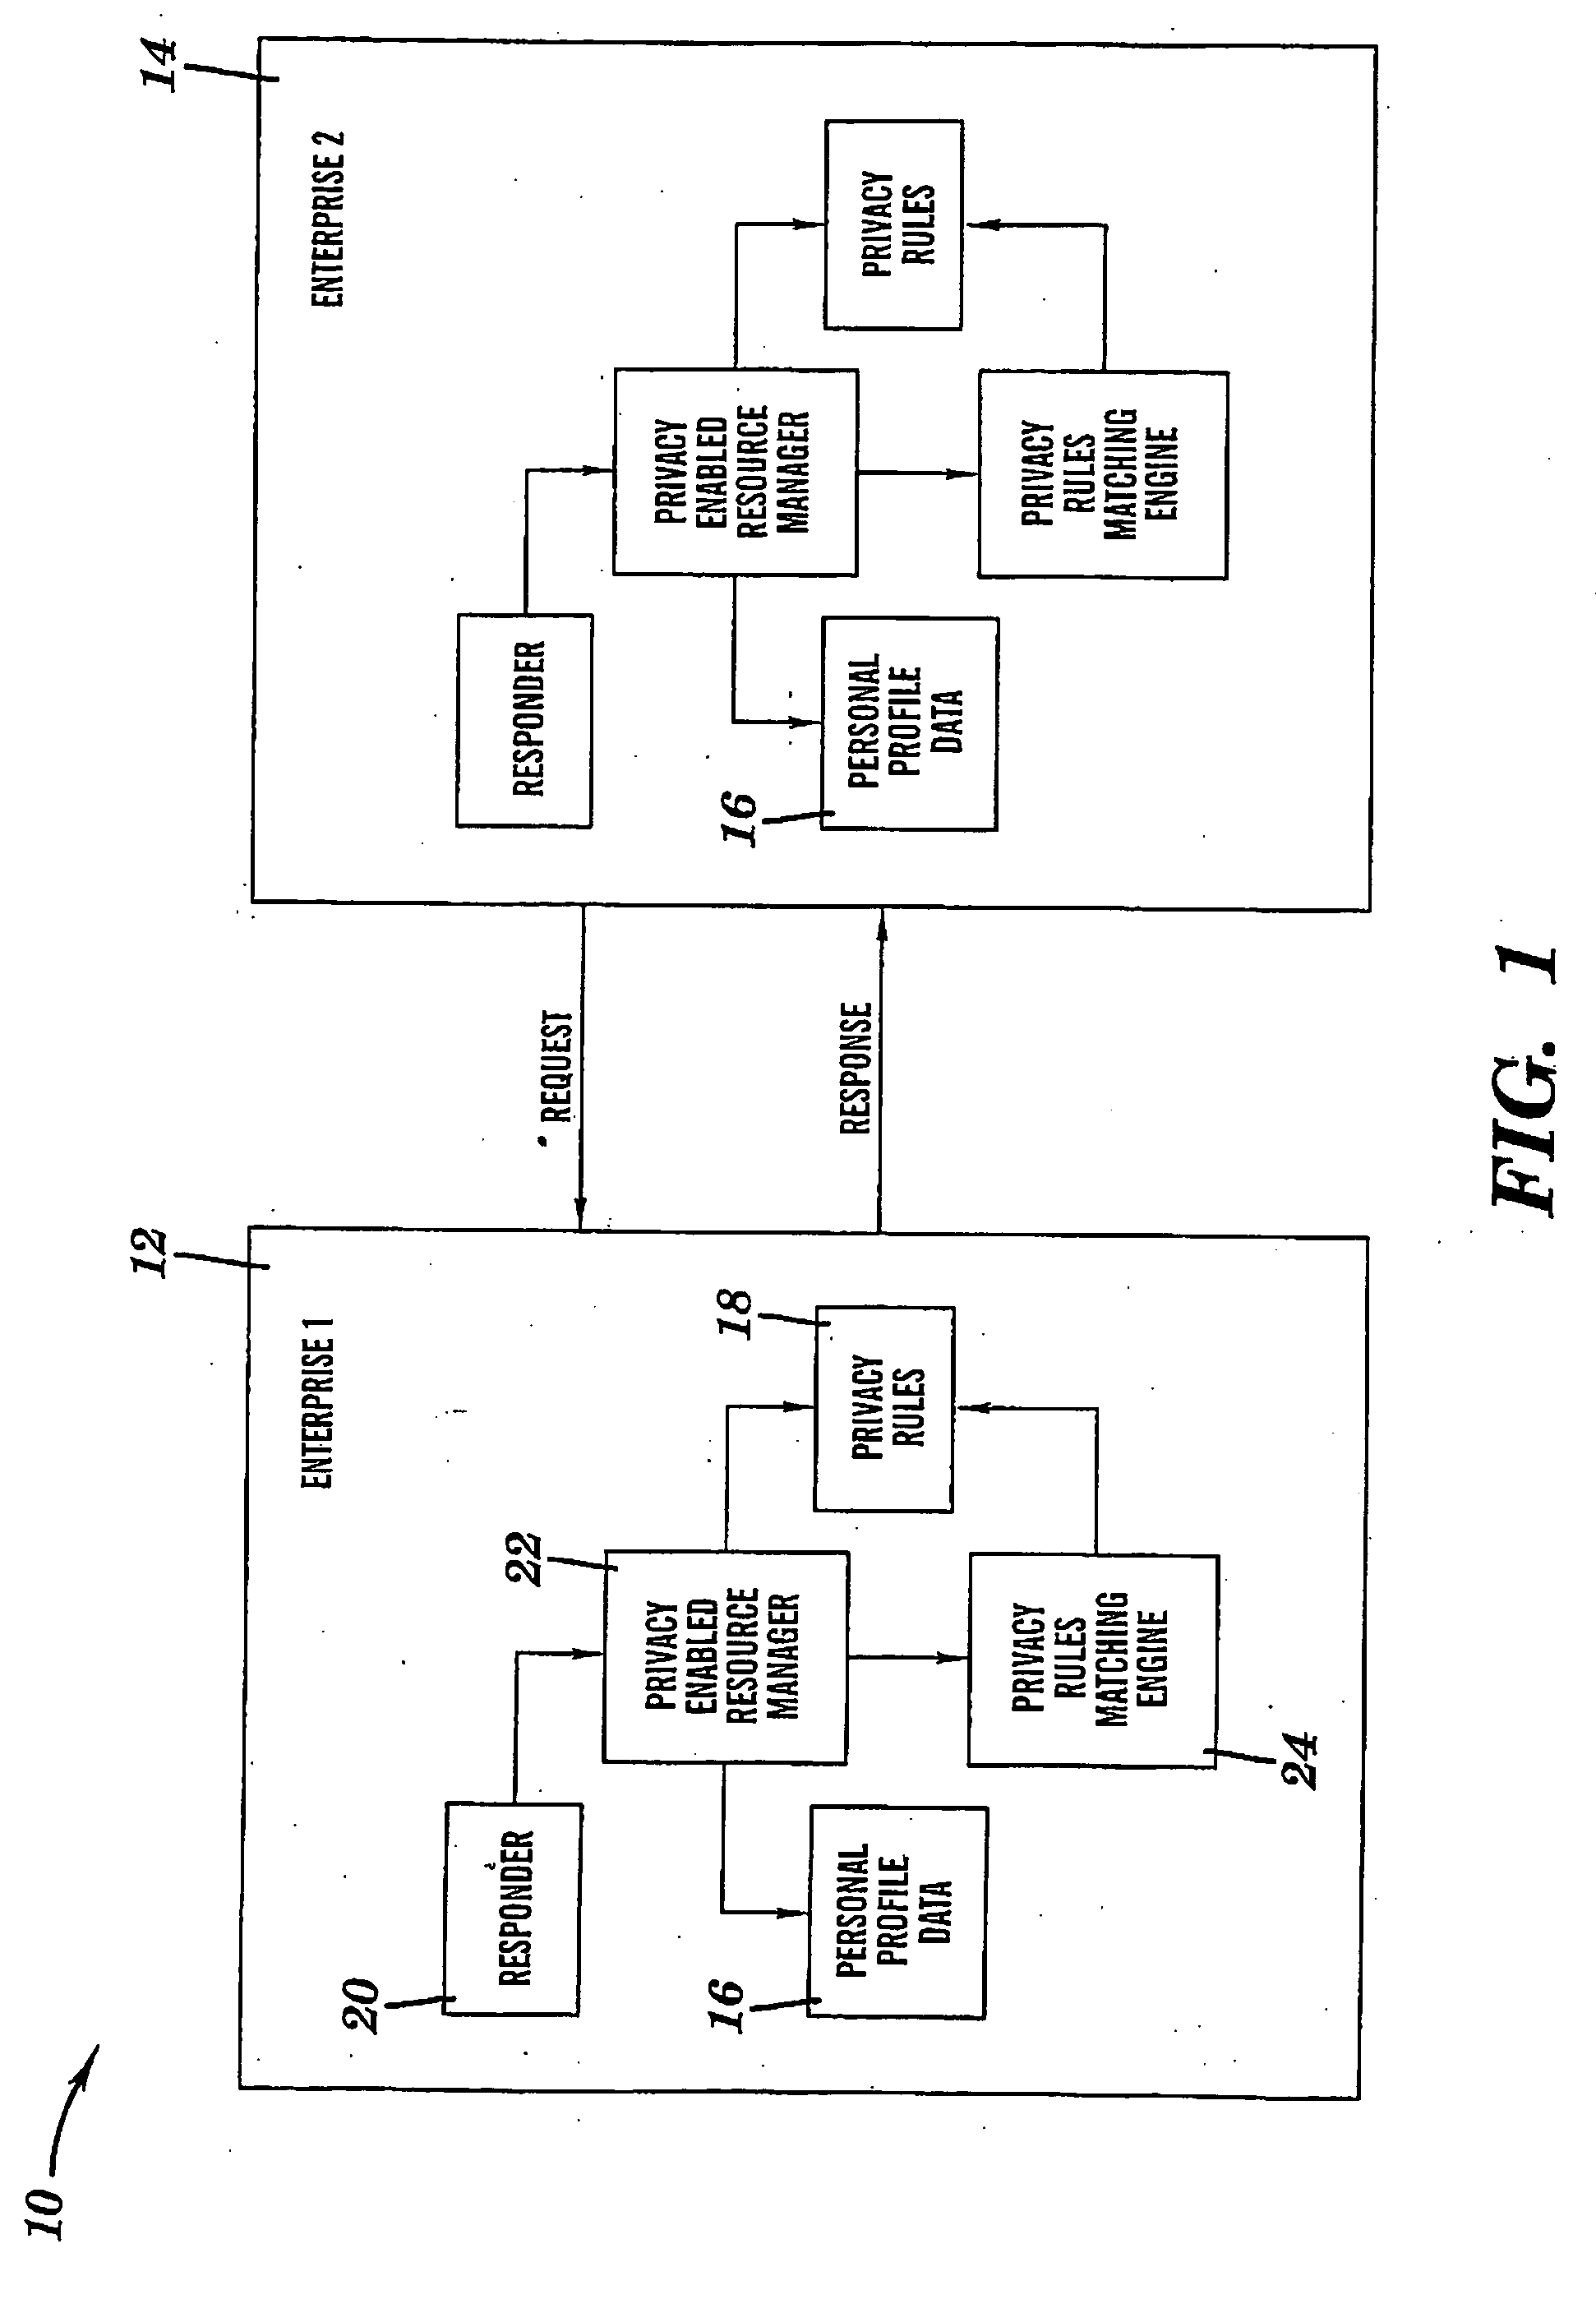 Secure system and method for enforcement of privacy policy and protection of confidentiality